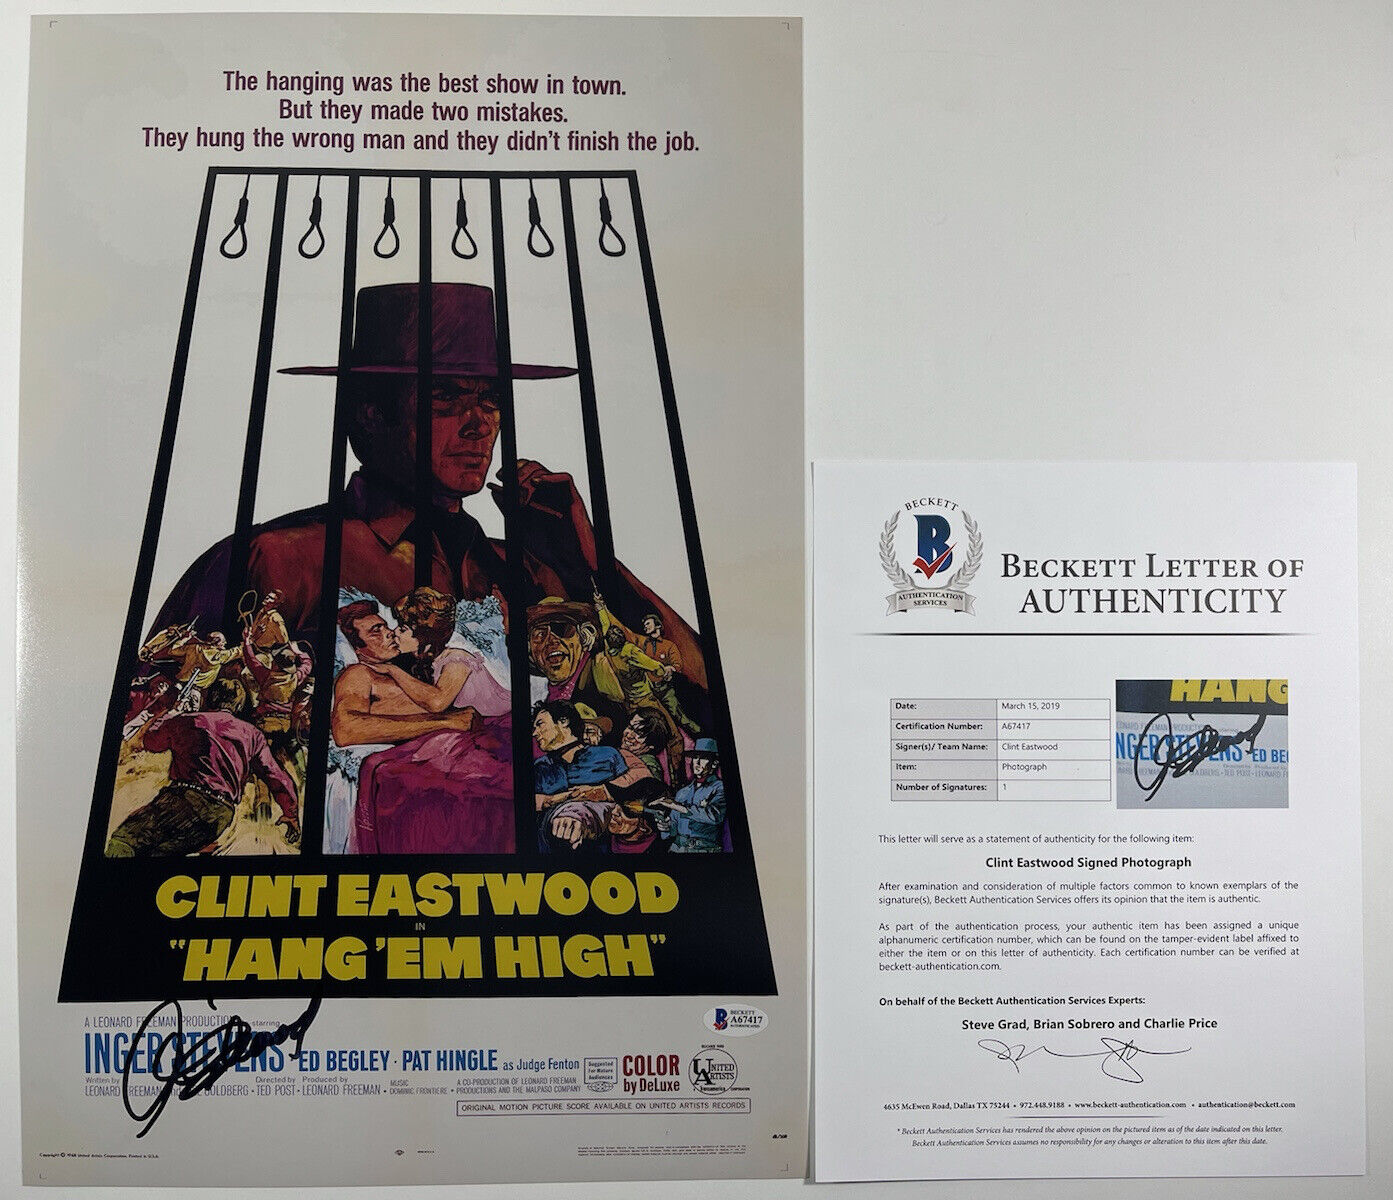 CLINT EASTWOOD SIGNED HANG EM HIGH 12x18 Photo Poster painting MOVIE POSTER BAS LOA #A67417